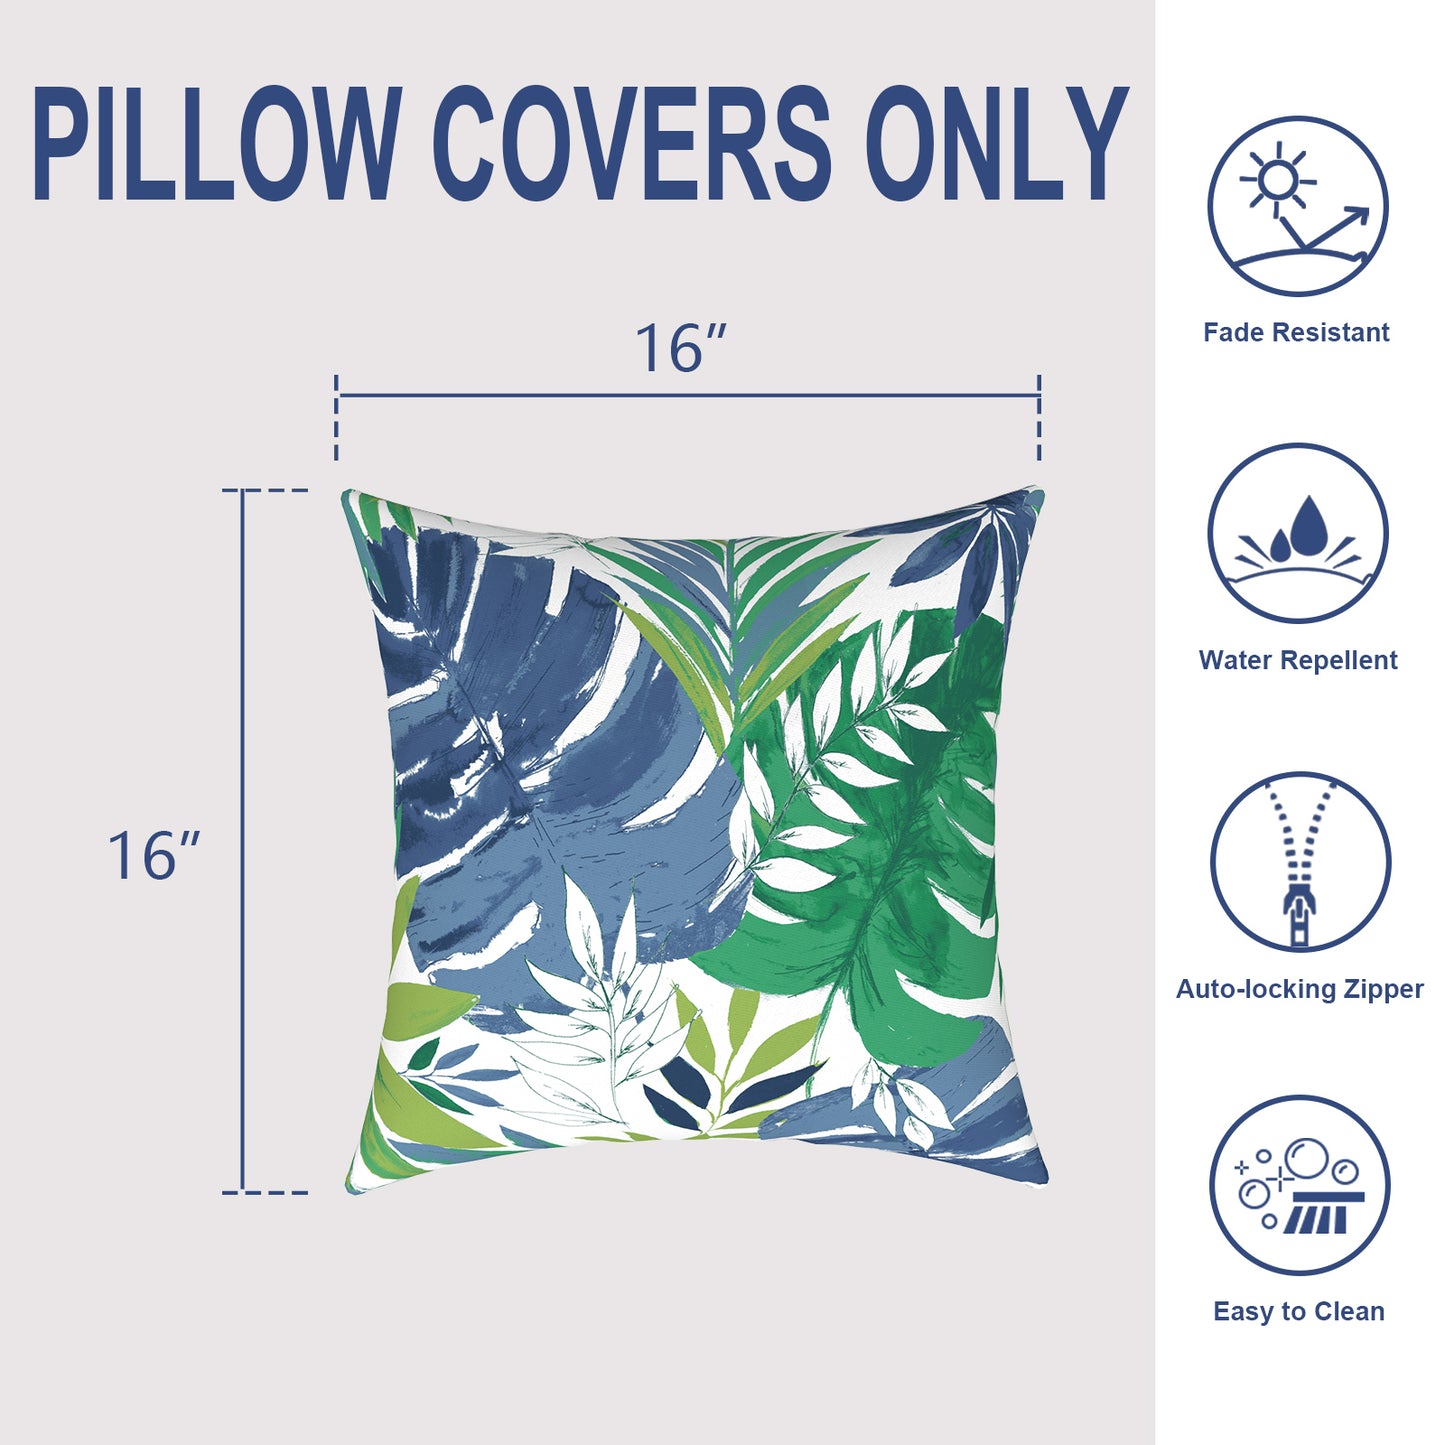 Melody Elephant Outdoor/Indoor Throw Pillow Covers Set of 2, All Weather Square Pillow Cases 16x16 Inch, Patio Cushion Pillow of Home Furniture Use, Islamorada Blue Green